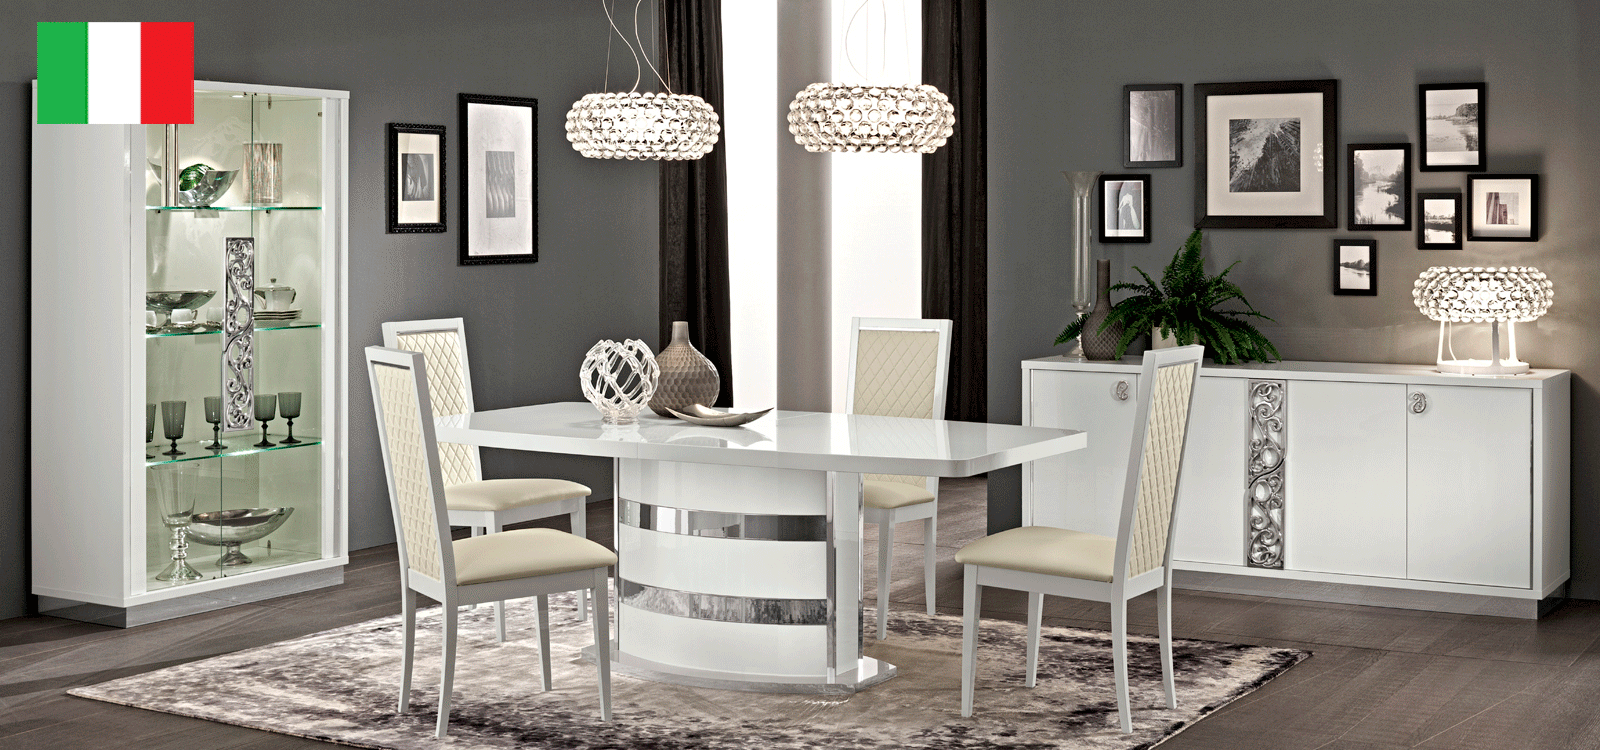 Brands Arredoclassic Dining Room, Italy Roma Dining White, Italy